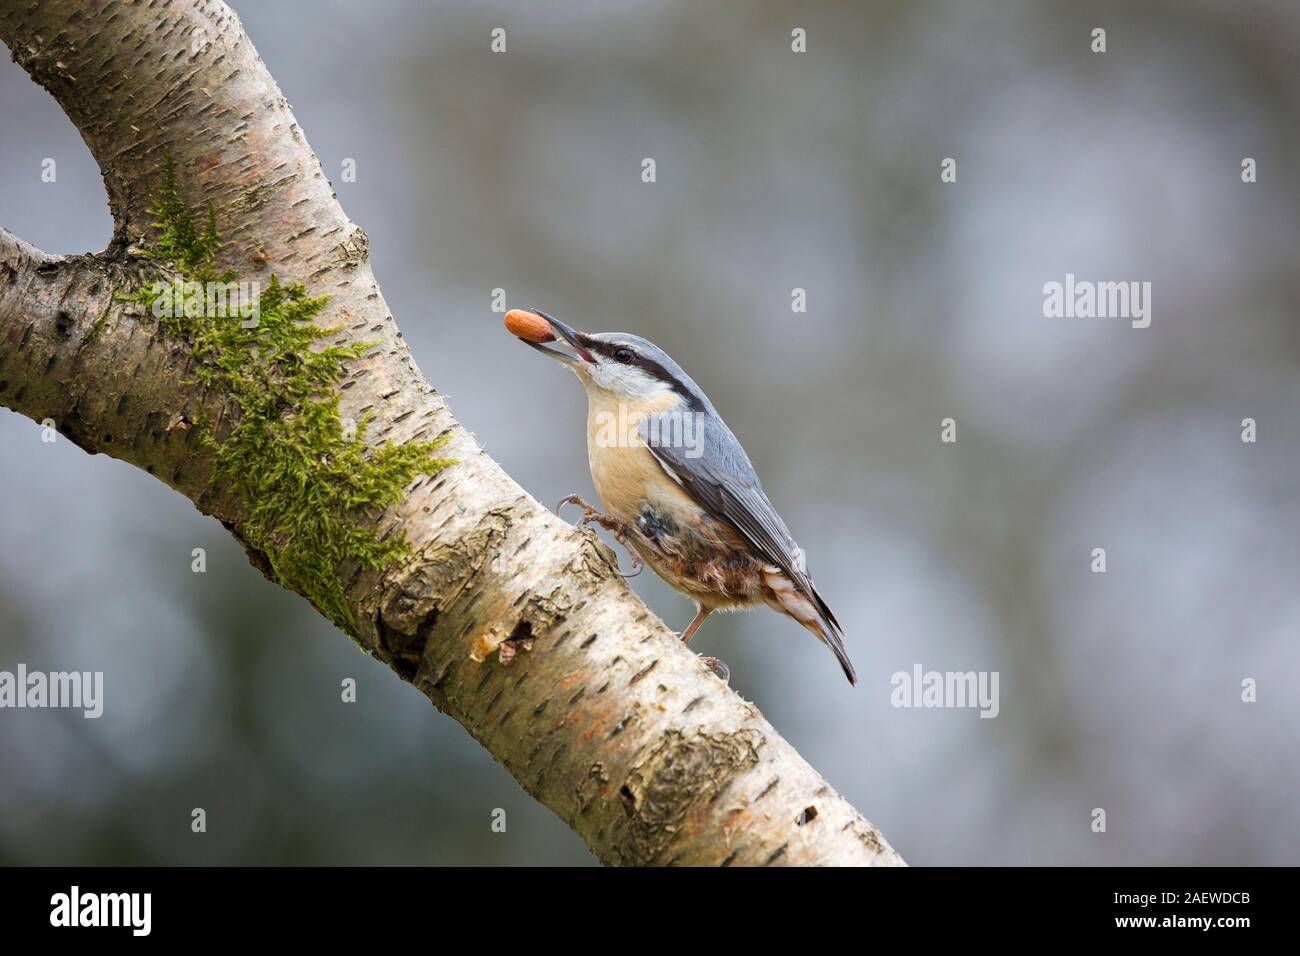 Eurasian nuthatch Sitta europaea with a peanut, perched on Silver birch Betula pendula in a garden, Crow, Ringwood, Hampshire, England, UK, March 2018 Stock Photo